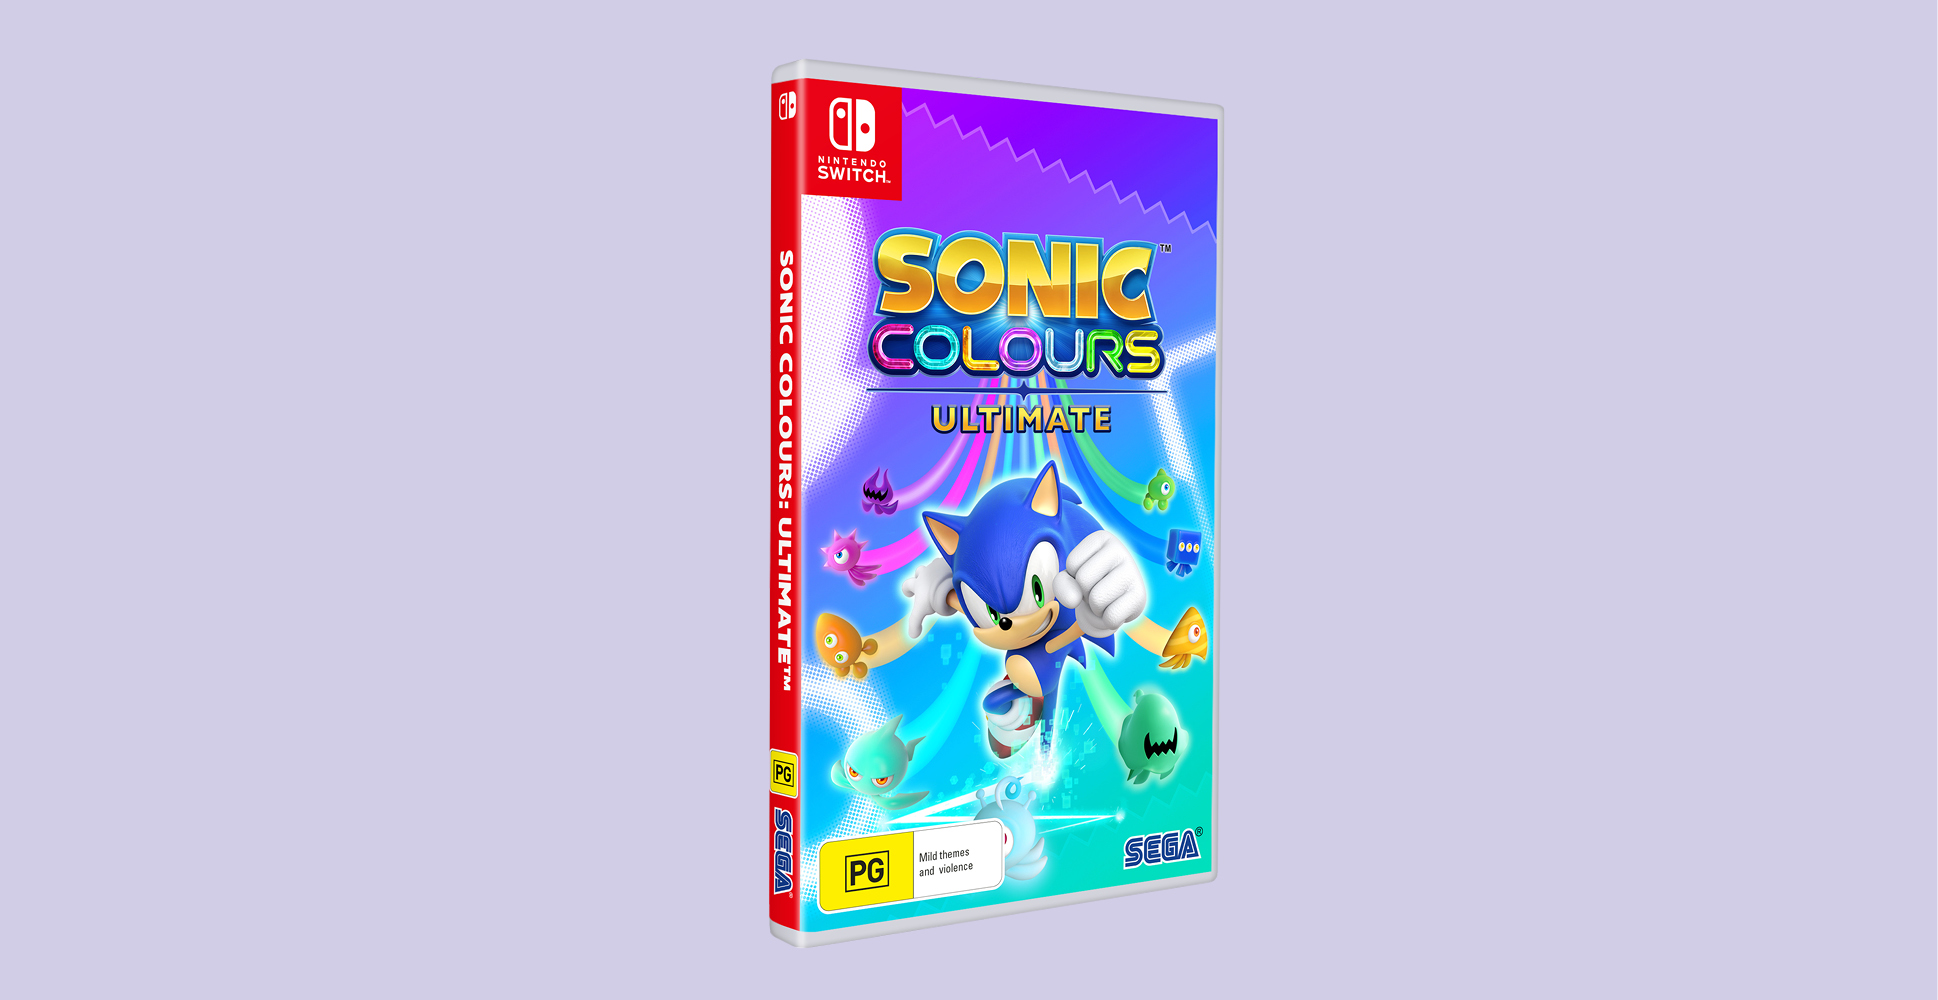 sonic colors ultimate initial release date